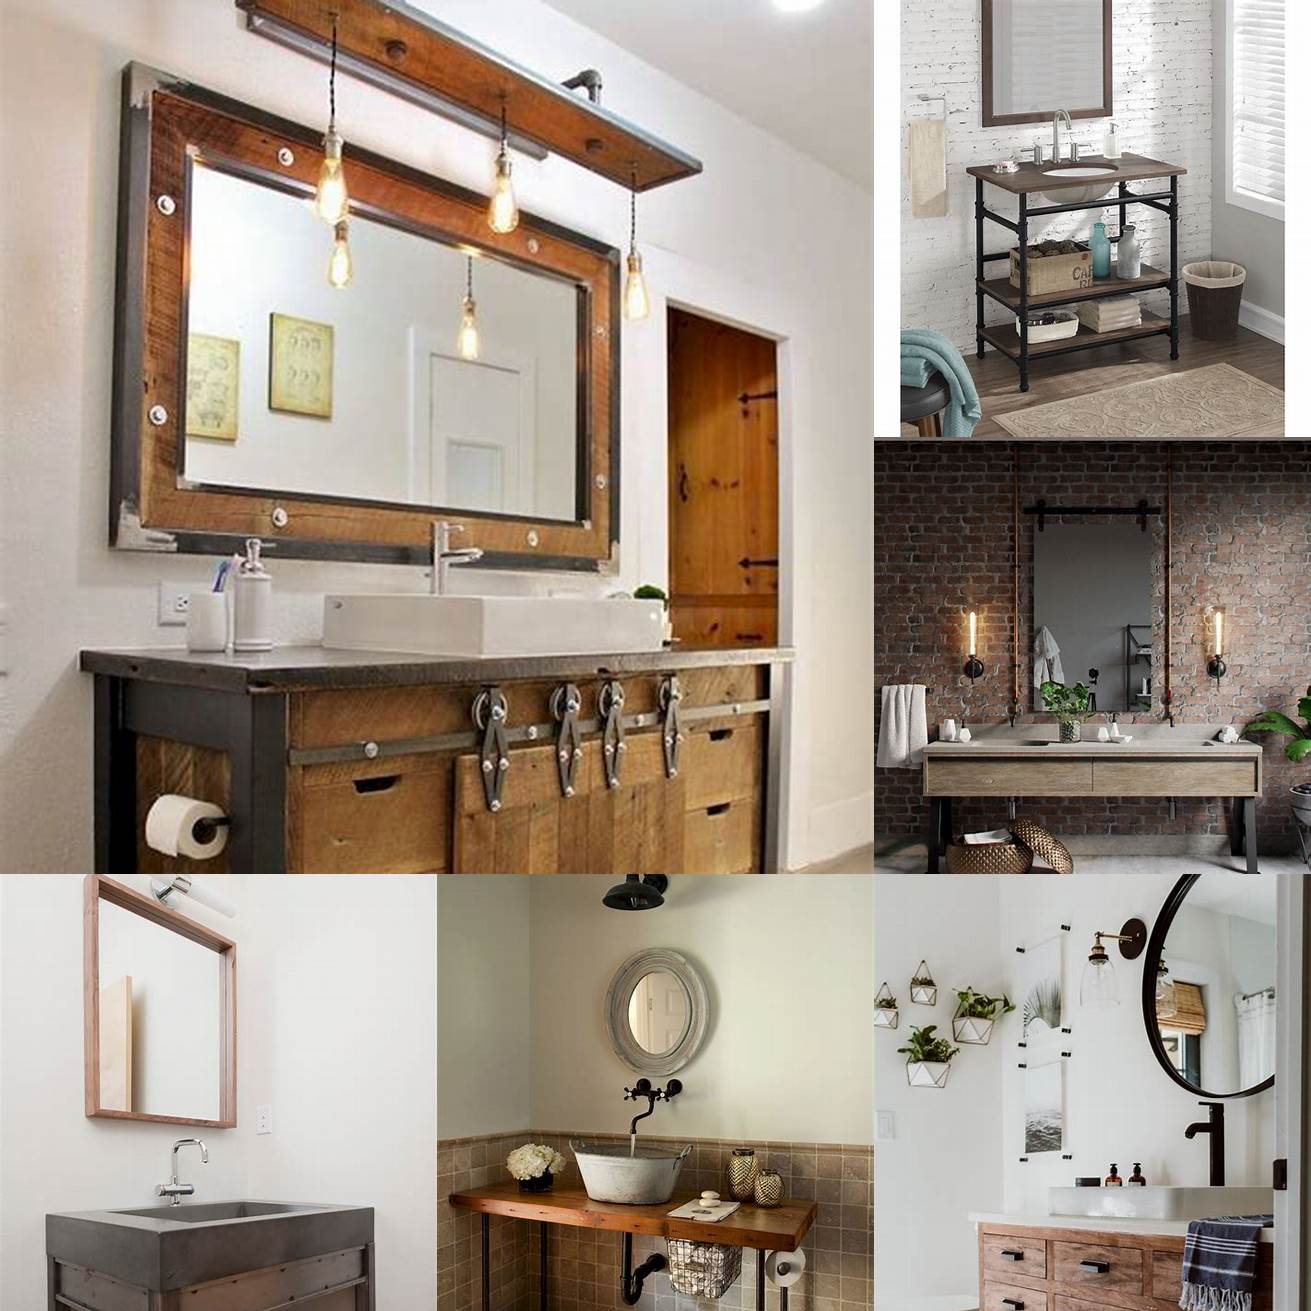 A minimalist and industrial-style modular bathroom vanity with open shelves a metal frame and a rustic wood countertop